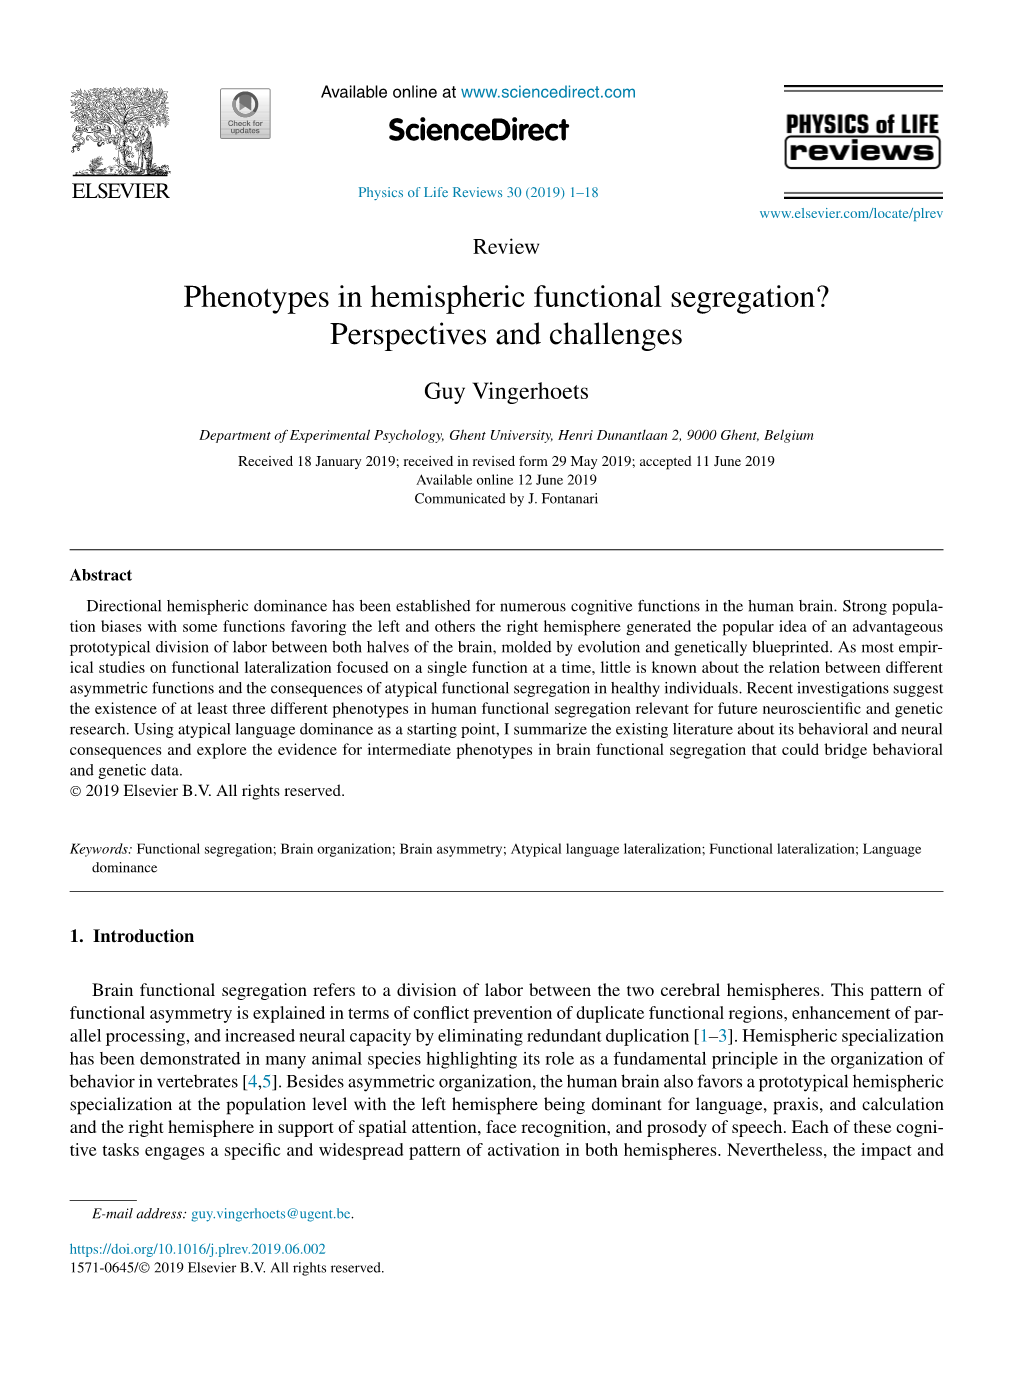 Phenotypes in Hemispheric Functional Segregation? Perspectives and Challenges